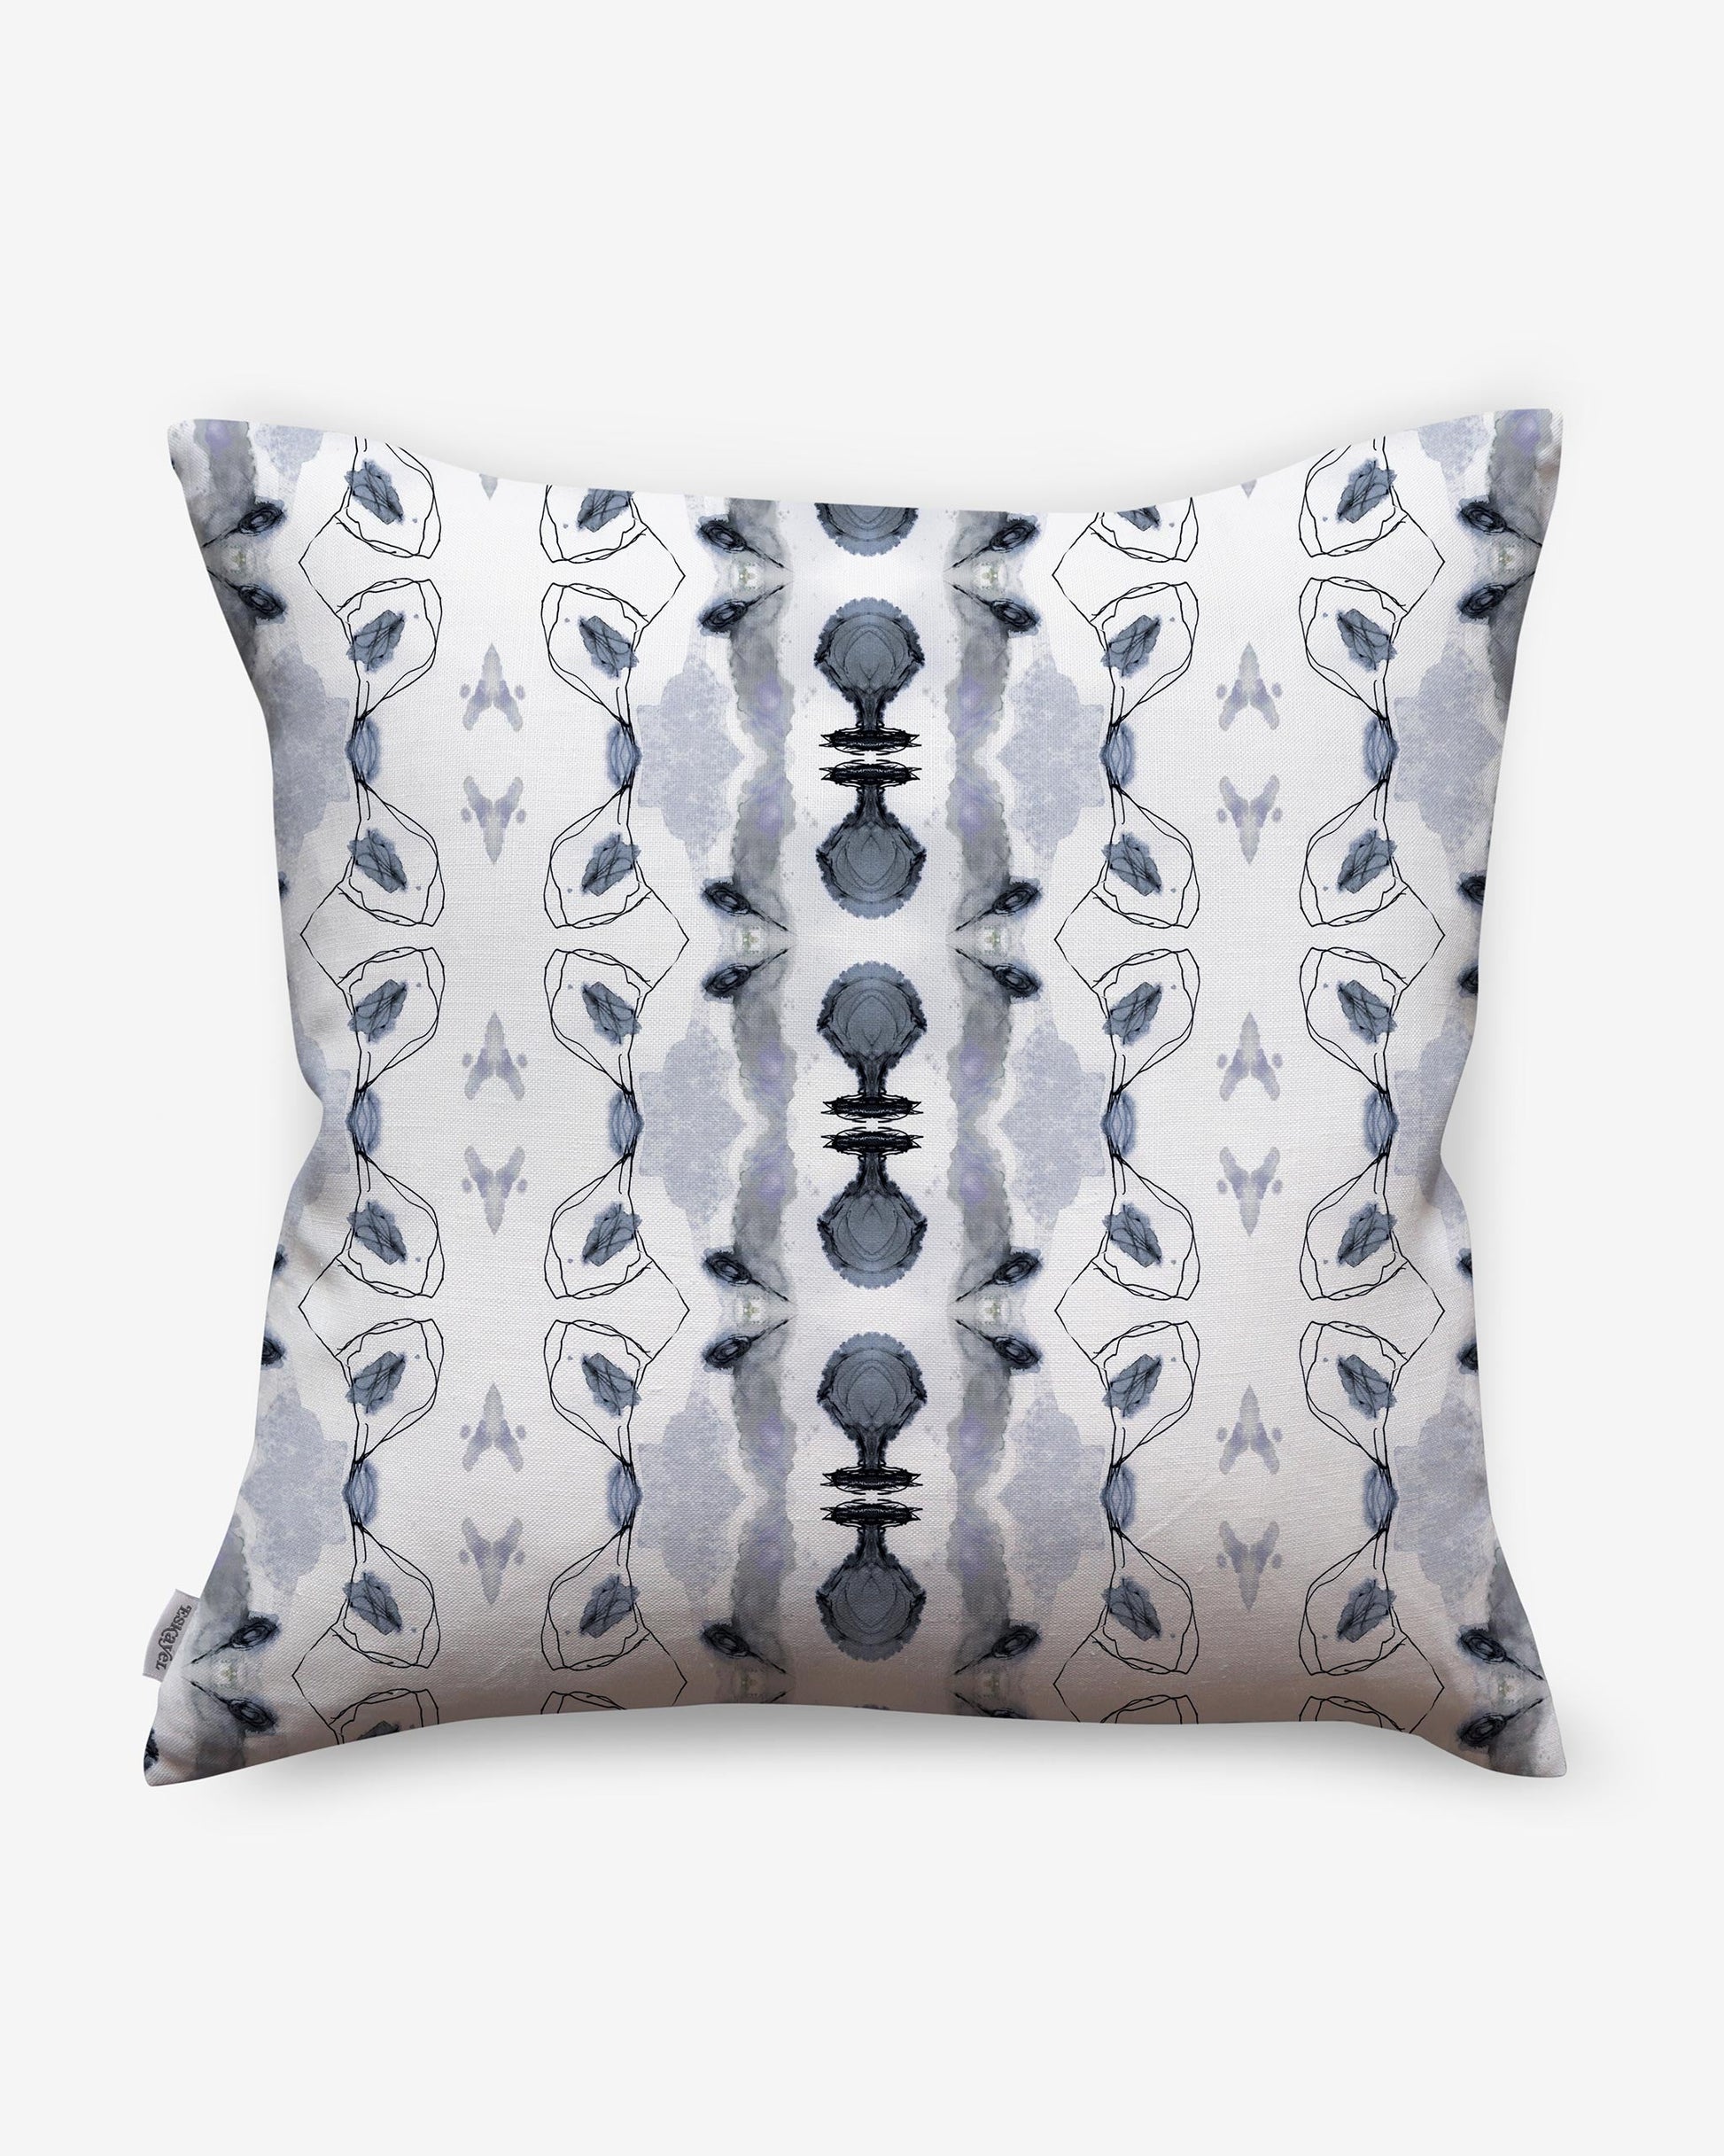 A Bali Stripe Outdoor Pillow Indigo with a blue and white abstract aesthetic design on it